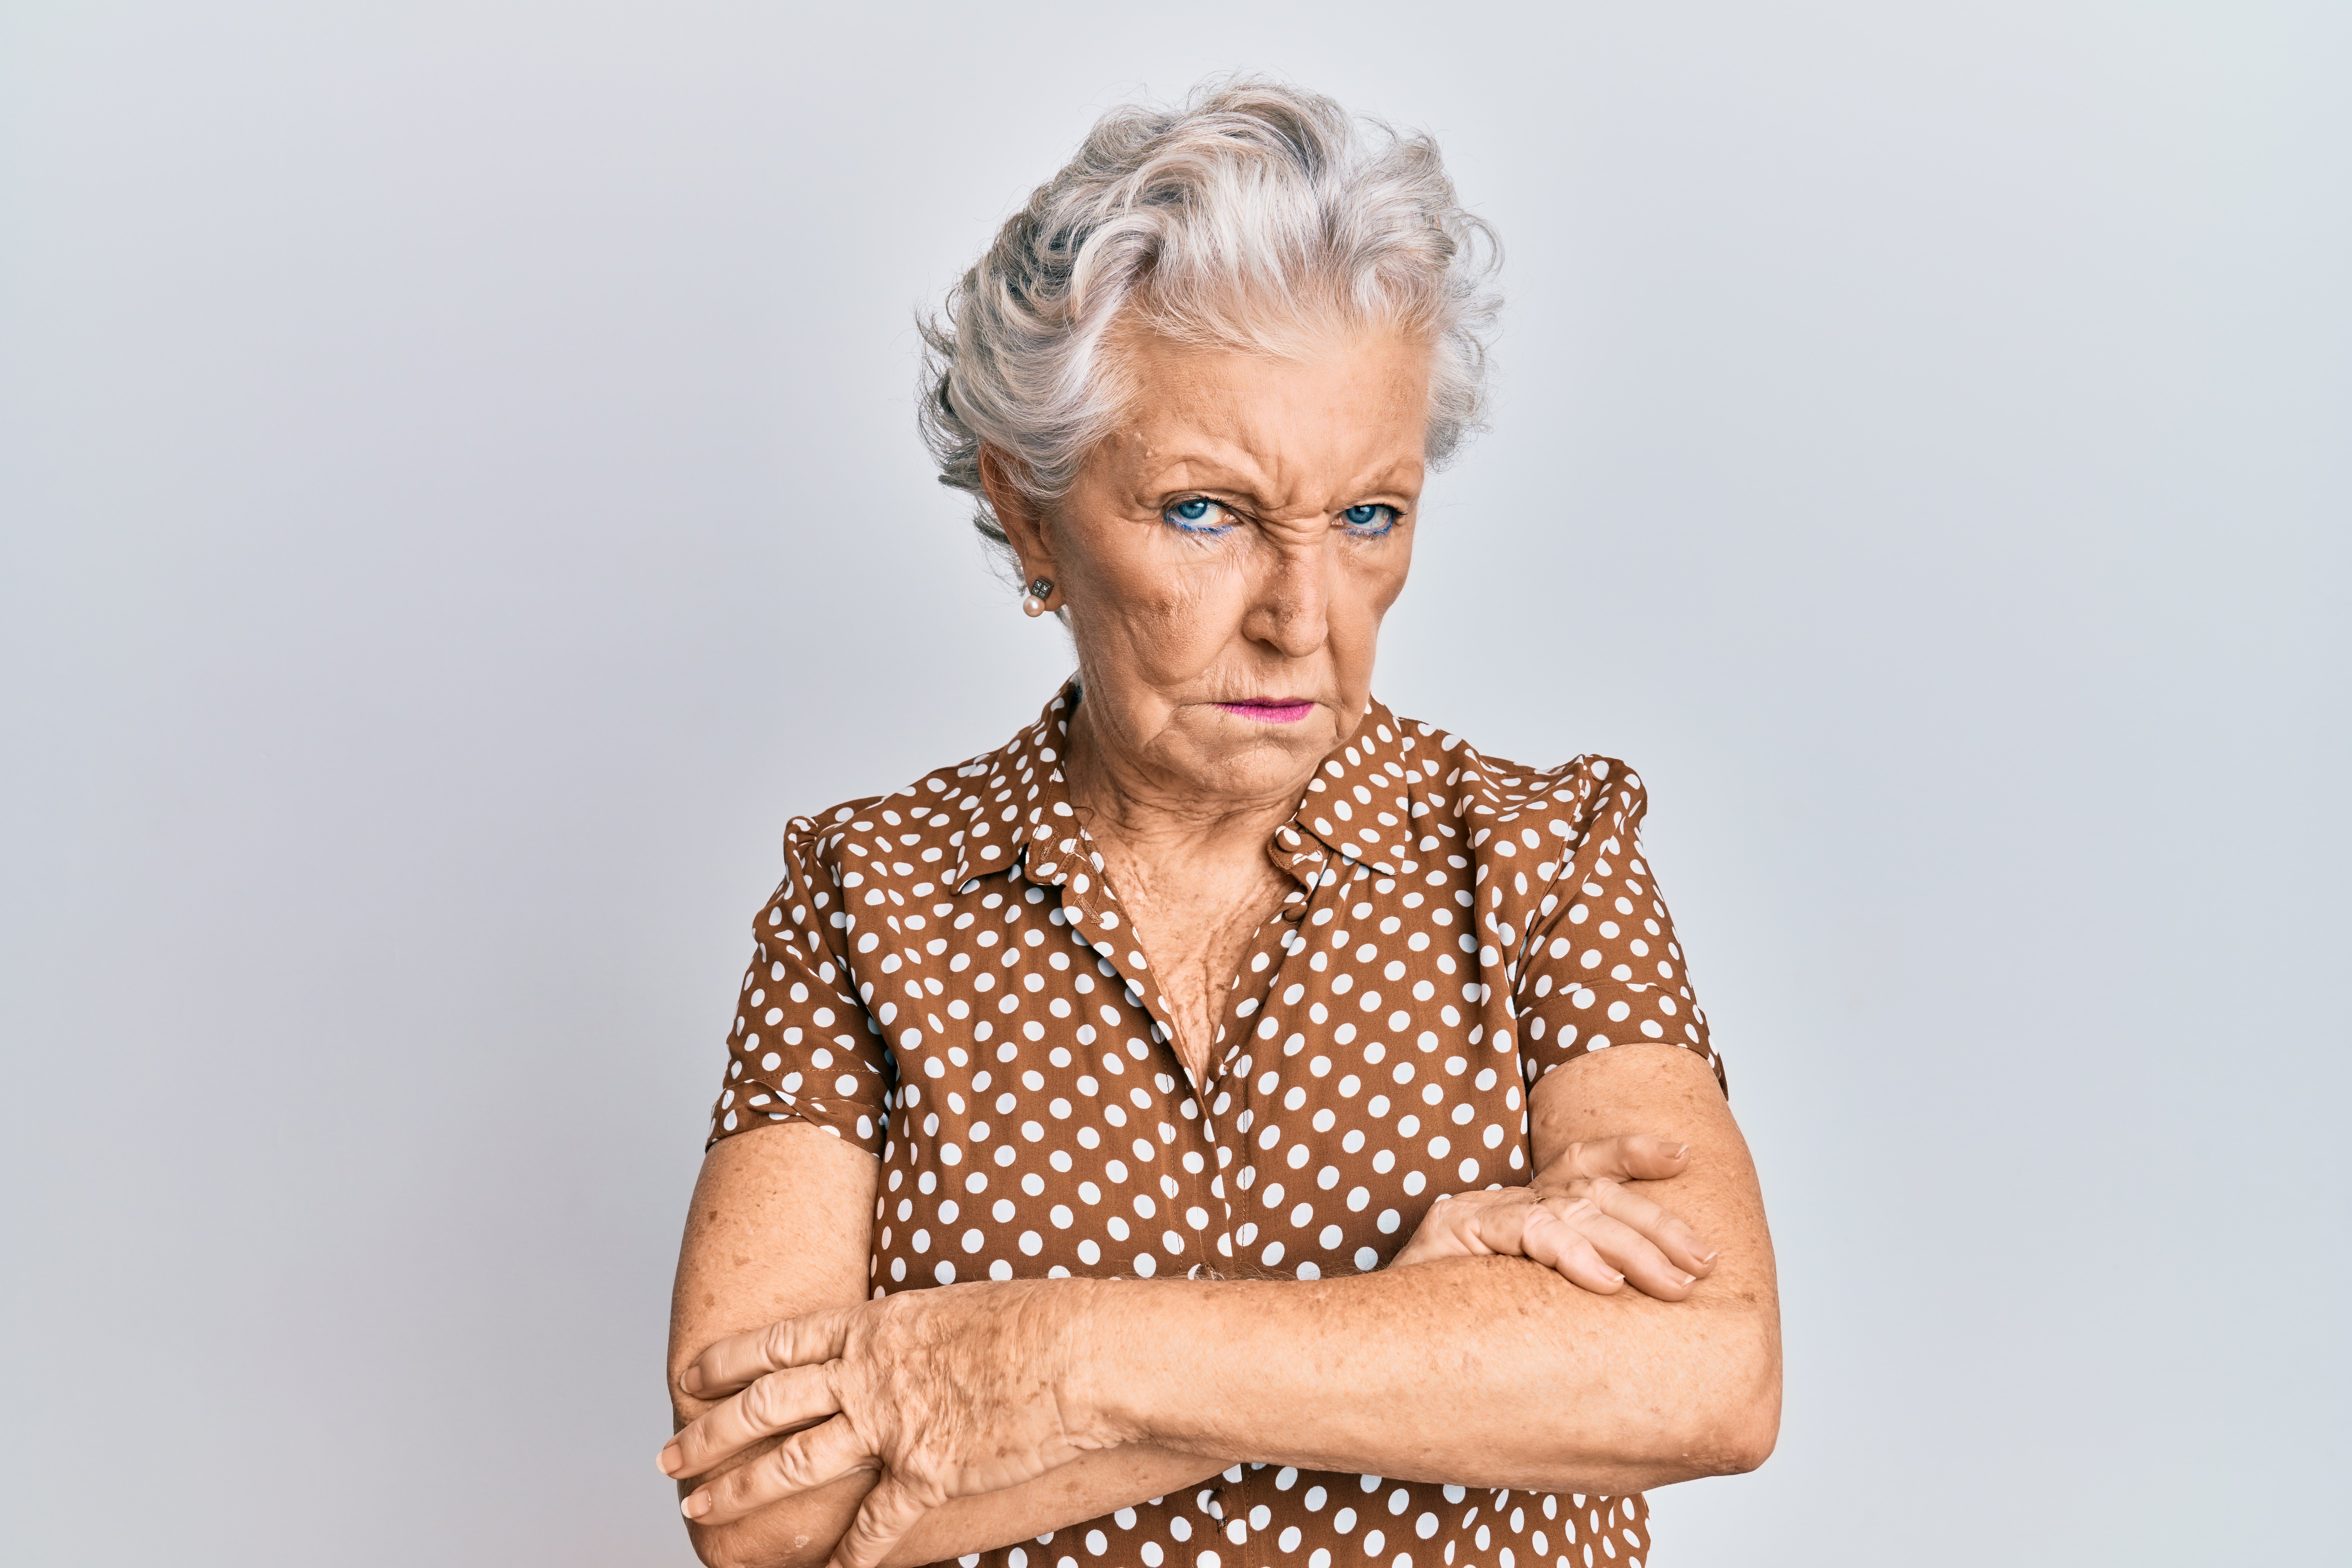 An elderly woman with a disapproving stare. | Source: Shutterstock 